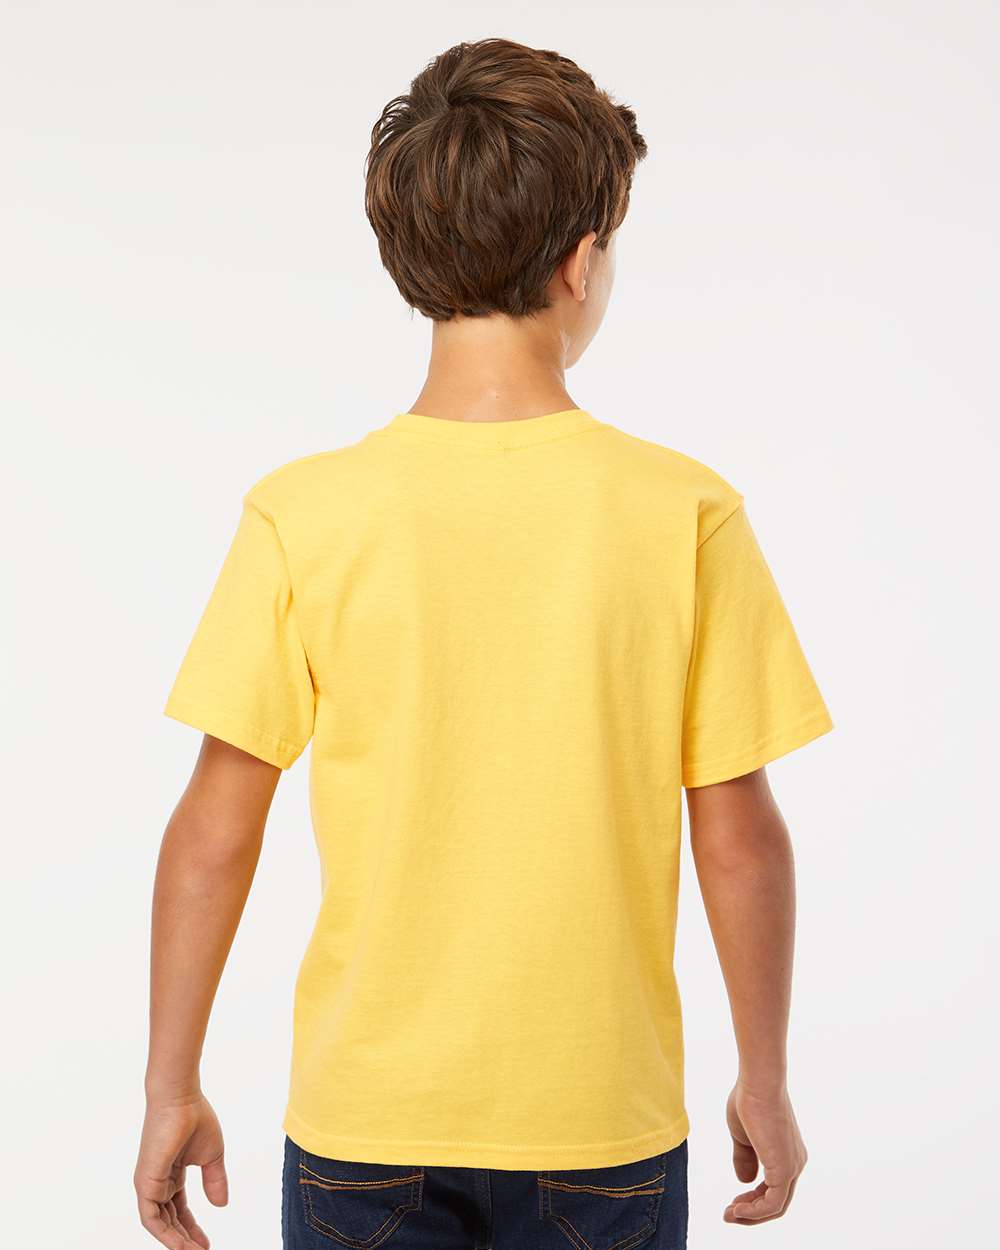 M&O Youth Gold Soft Touch T-Shirt 4850 #colormdl_Yellow